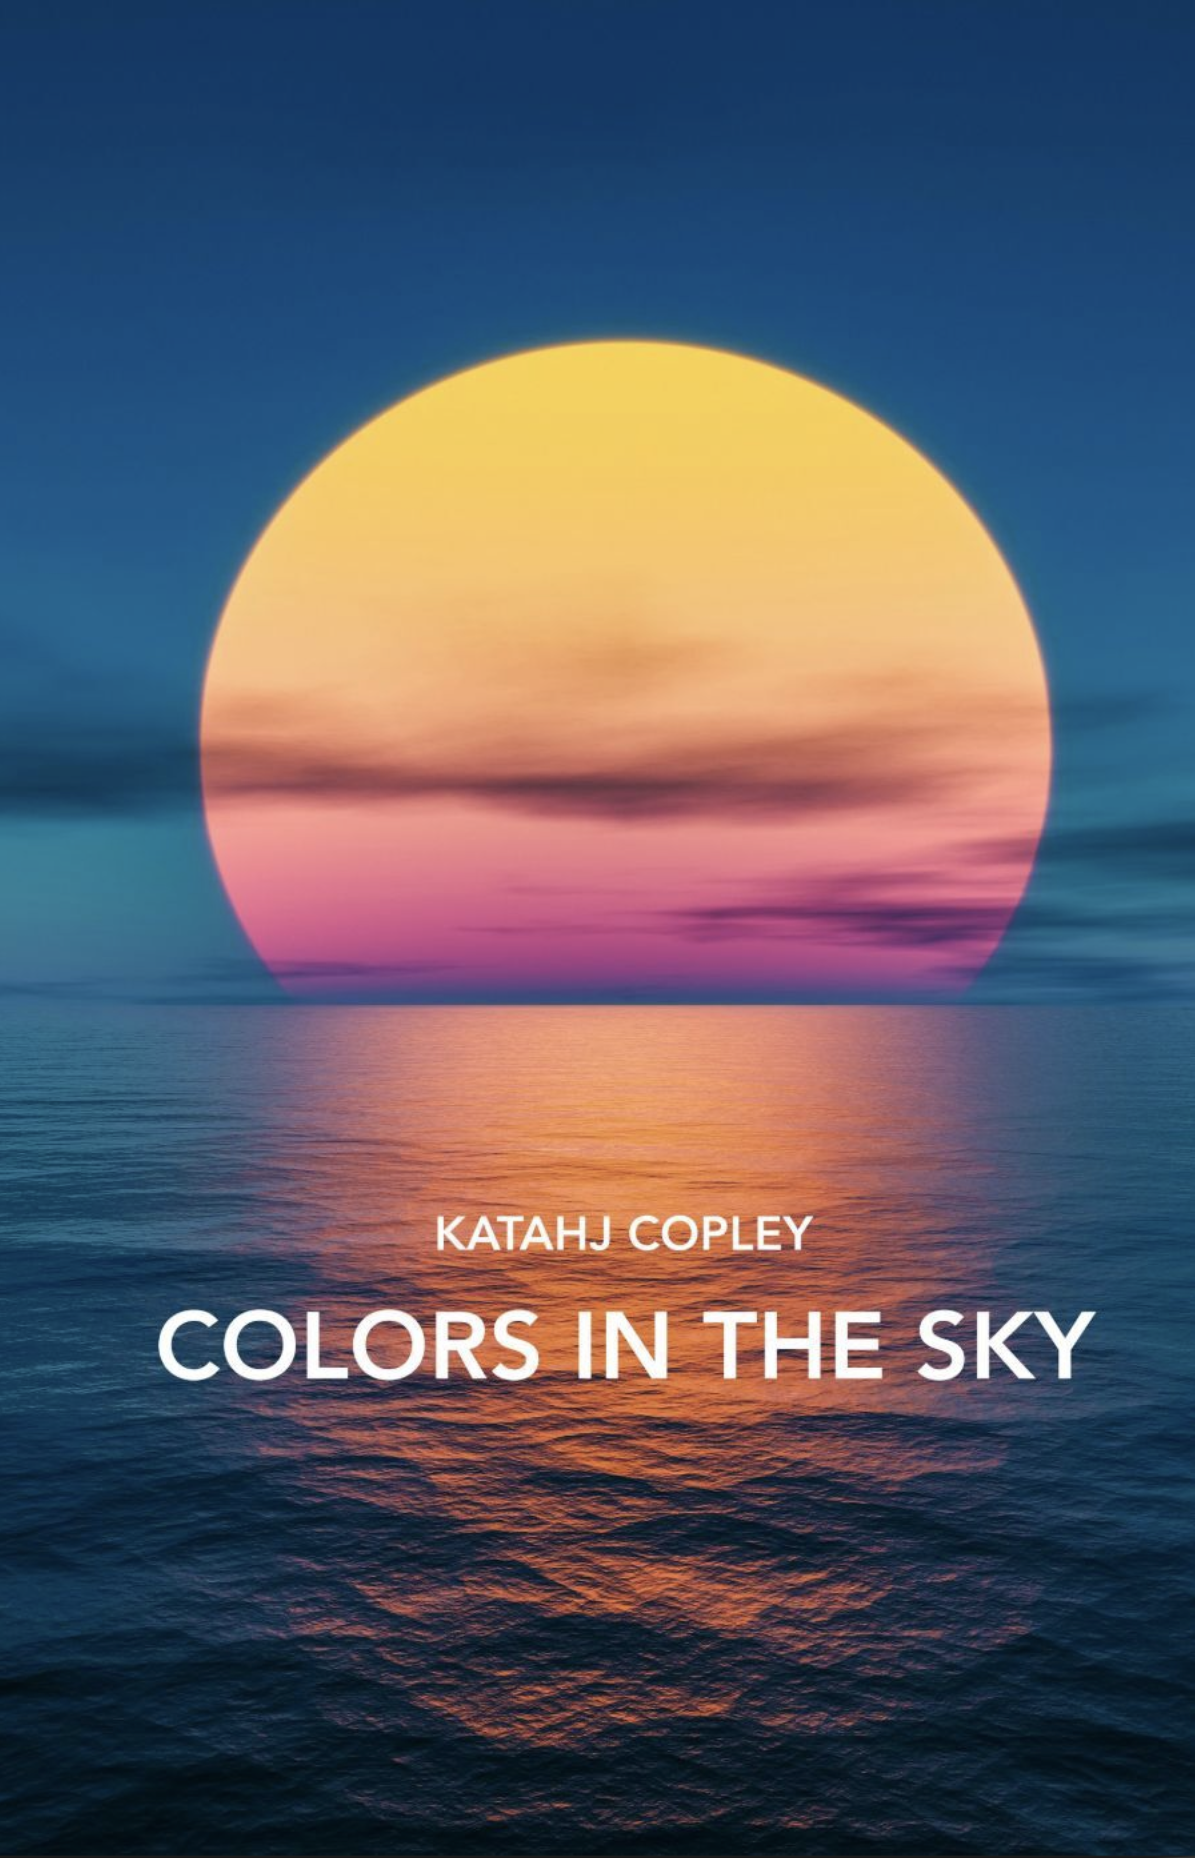 Colors In The Sky by Katahj Copley